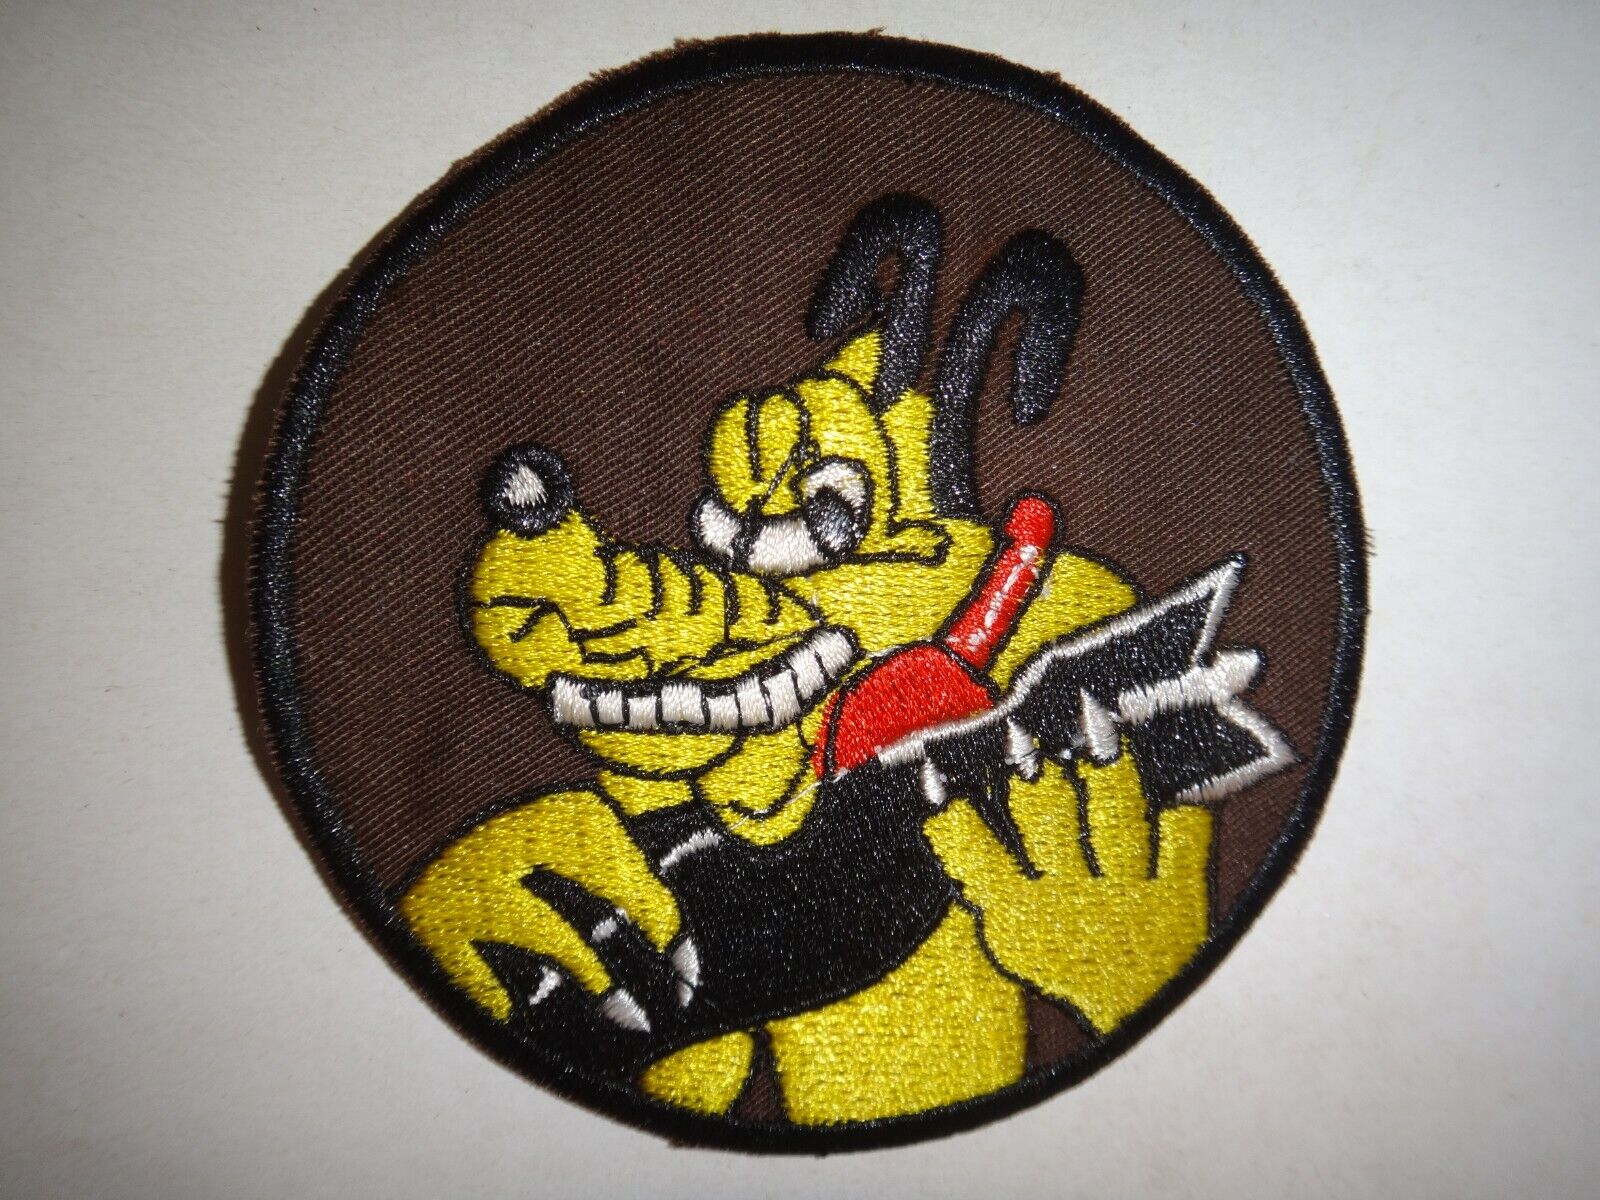 USAF 451st BOMBARDMENT Squadron 322nd BOMB Group Patch (Inactive)